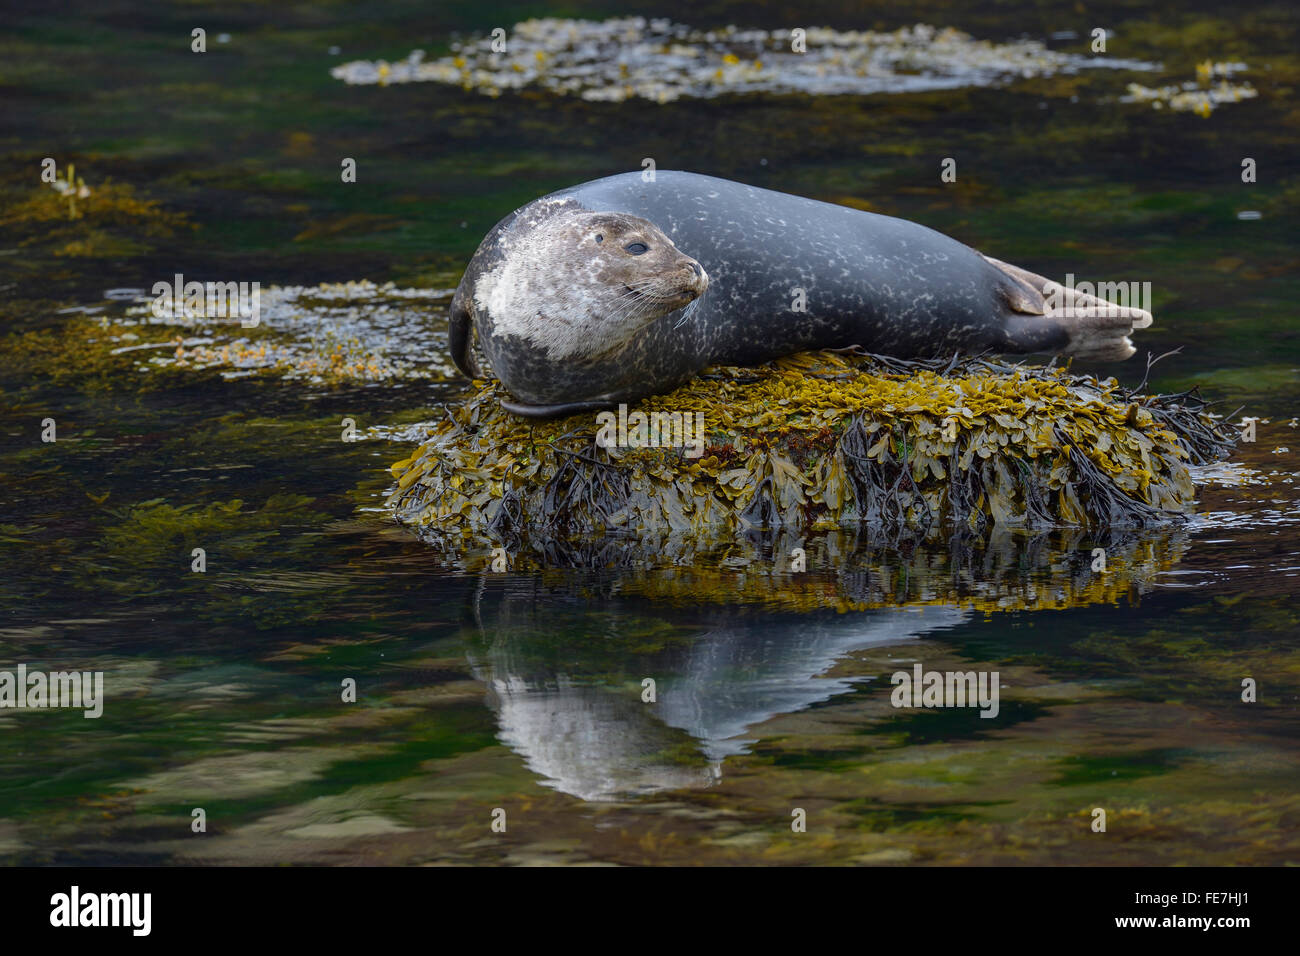 Common or harbour seal (Phoca vitulina) resting on stone in water, Arnarstapi, West Iceland, Iceland Stock Photo